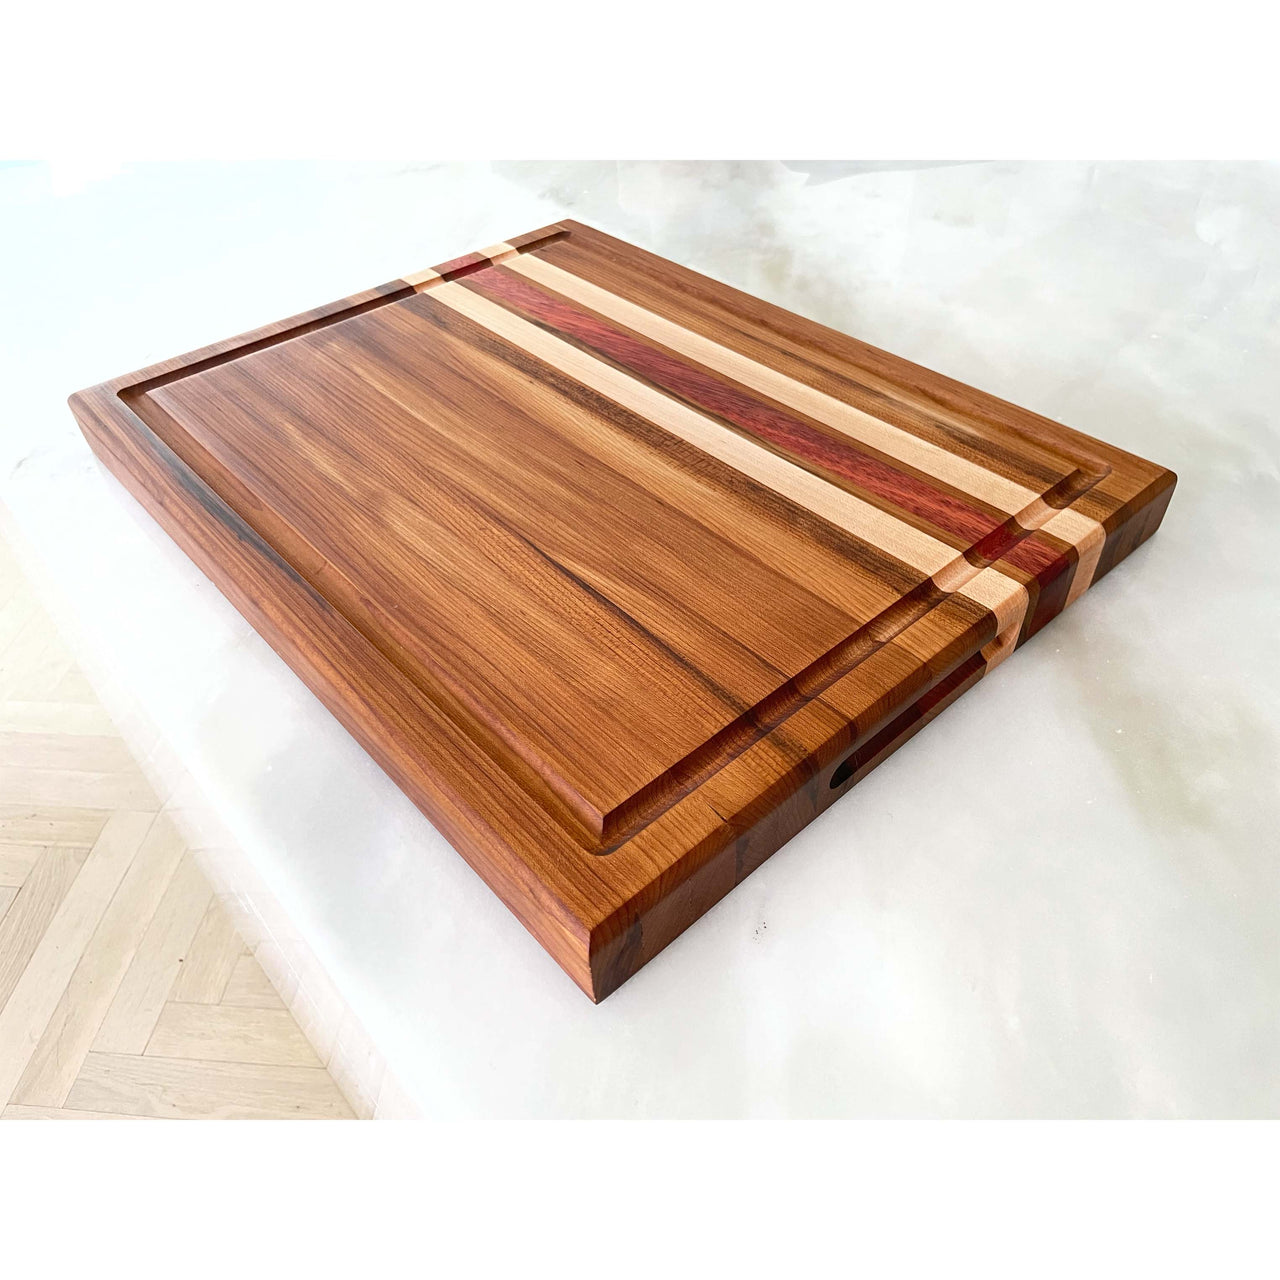 Hardwood Edge Grain Cutting Board, #35 - Cutting Boards - T and T Tables -  Woodworker in North Royalton